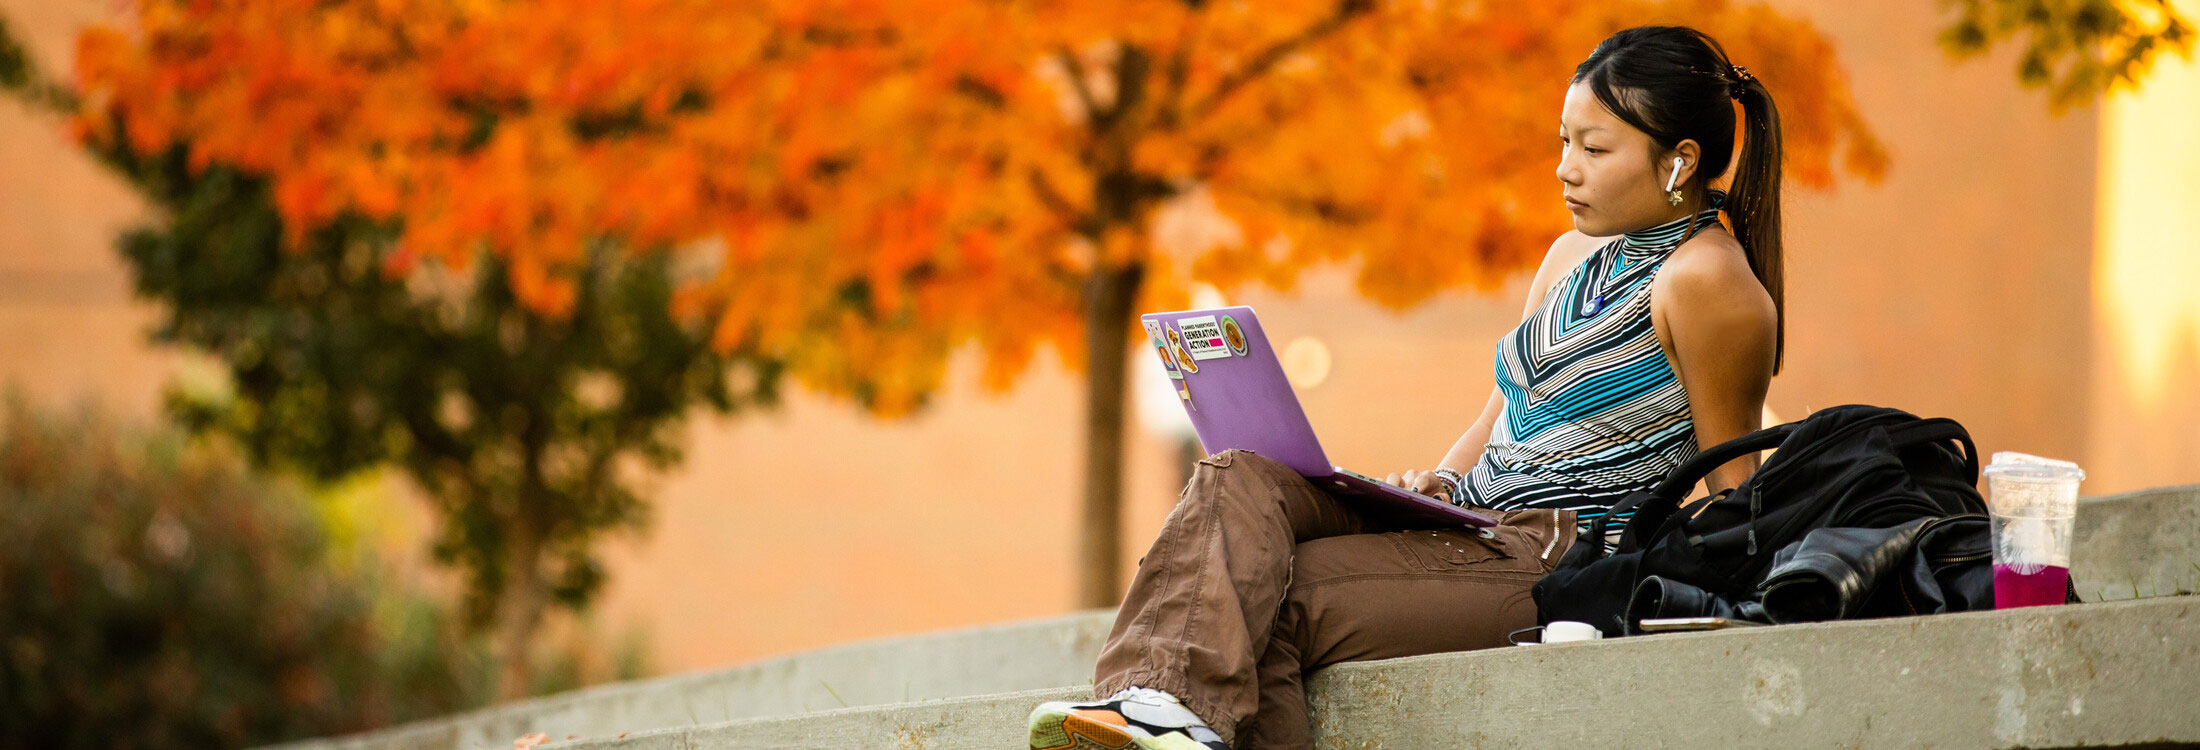 A student sits in the amphitheater on campus with orange fall leaves in the background and with their purple laptop on their lap. Their legs are crossed and they are wearing sneakers, brown pants and a striped blue blouse.